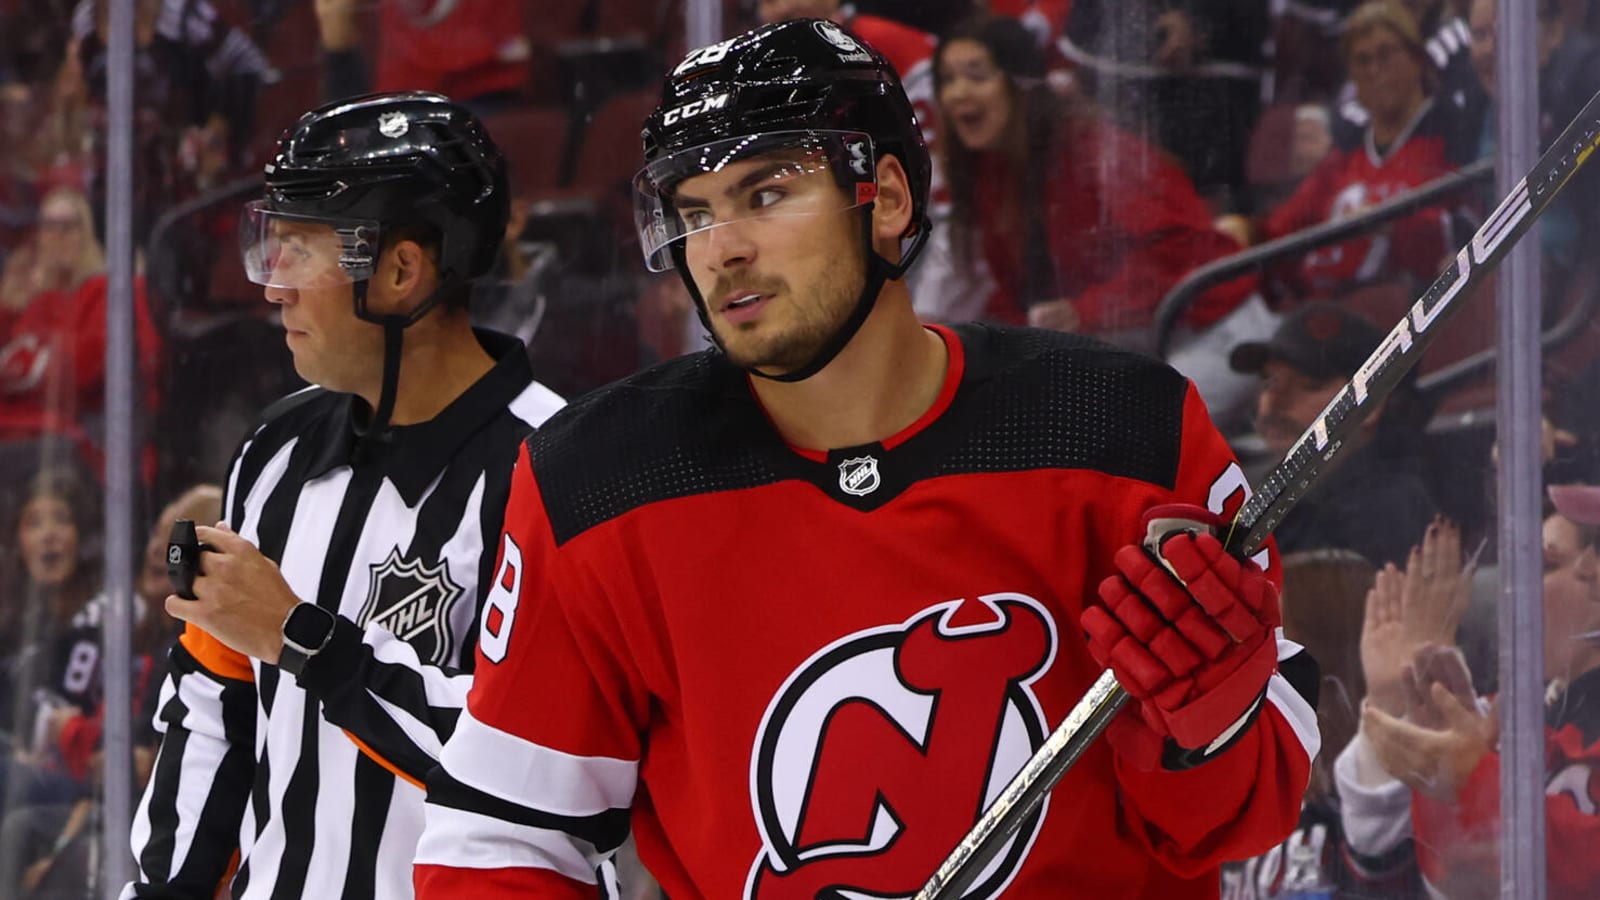 Can Timo Meier bounce back after slow start for Devils?